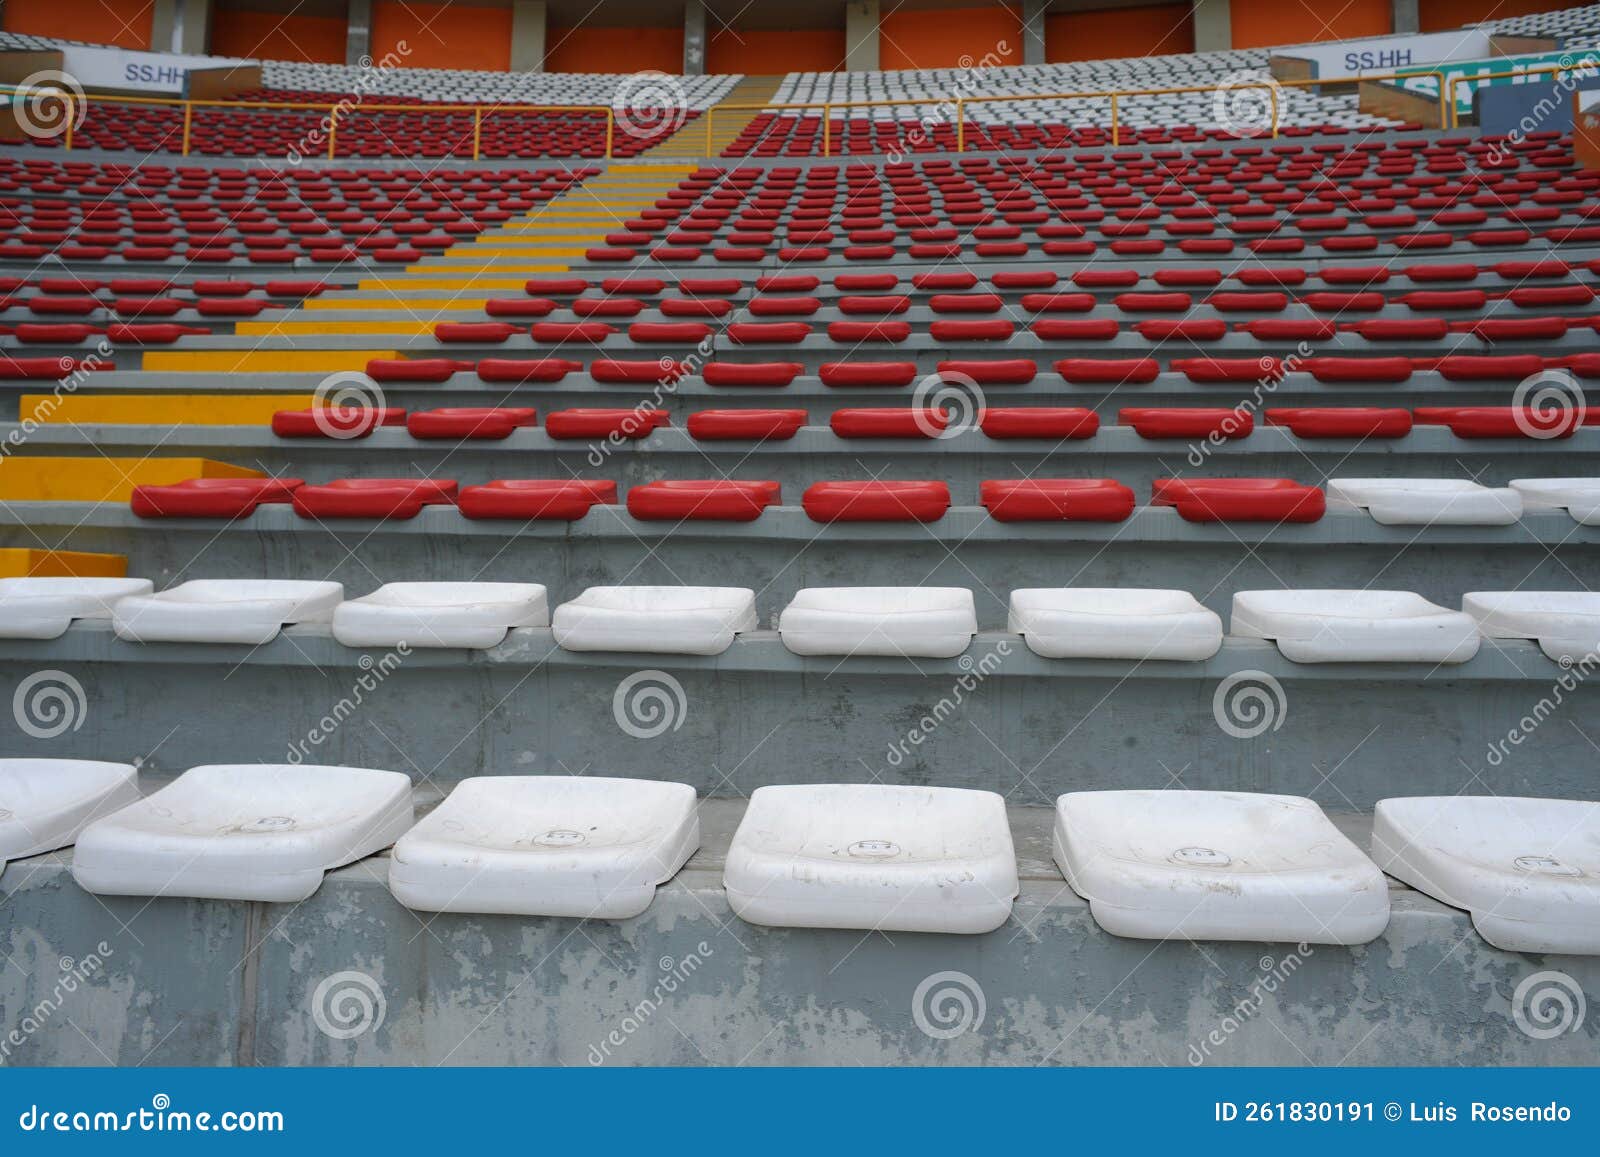 rows of empty orange and white seats in the sports complex of the estadio nacional - soccer stadium - in lima peru